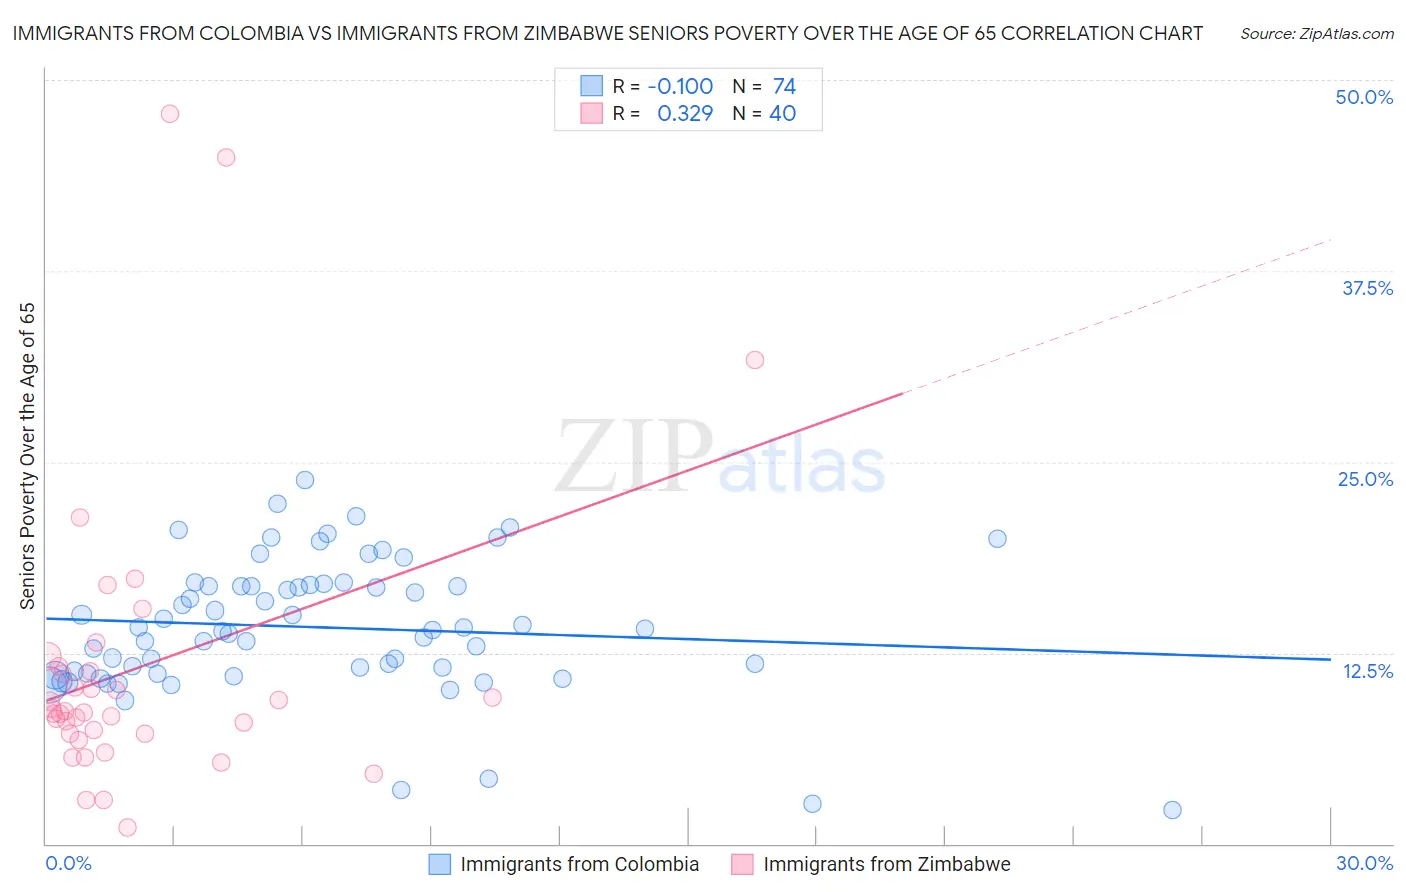 Immigrants from Colombia vs Immigrants from Zimbabwe Seniors Poverty Over the Age of 65